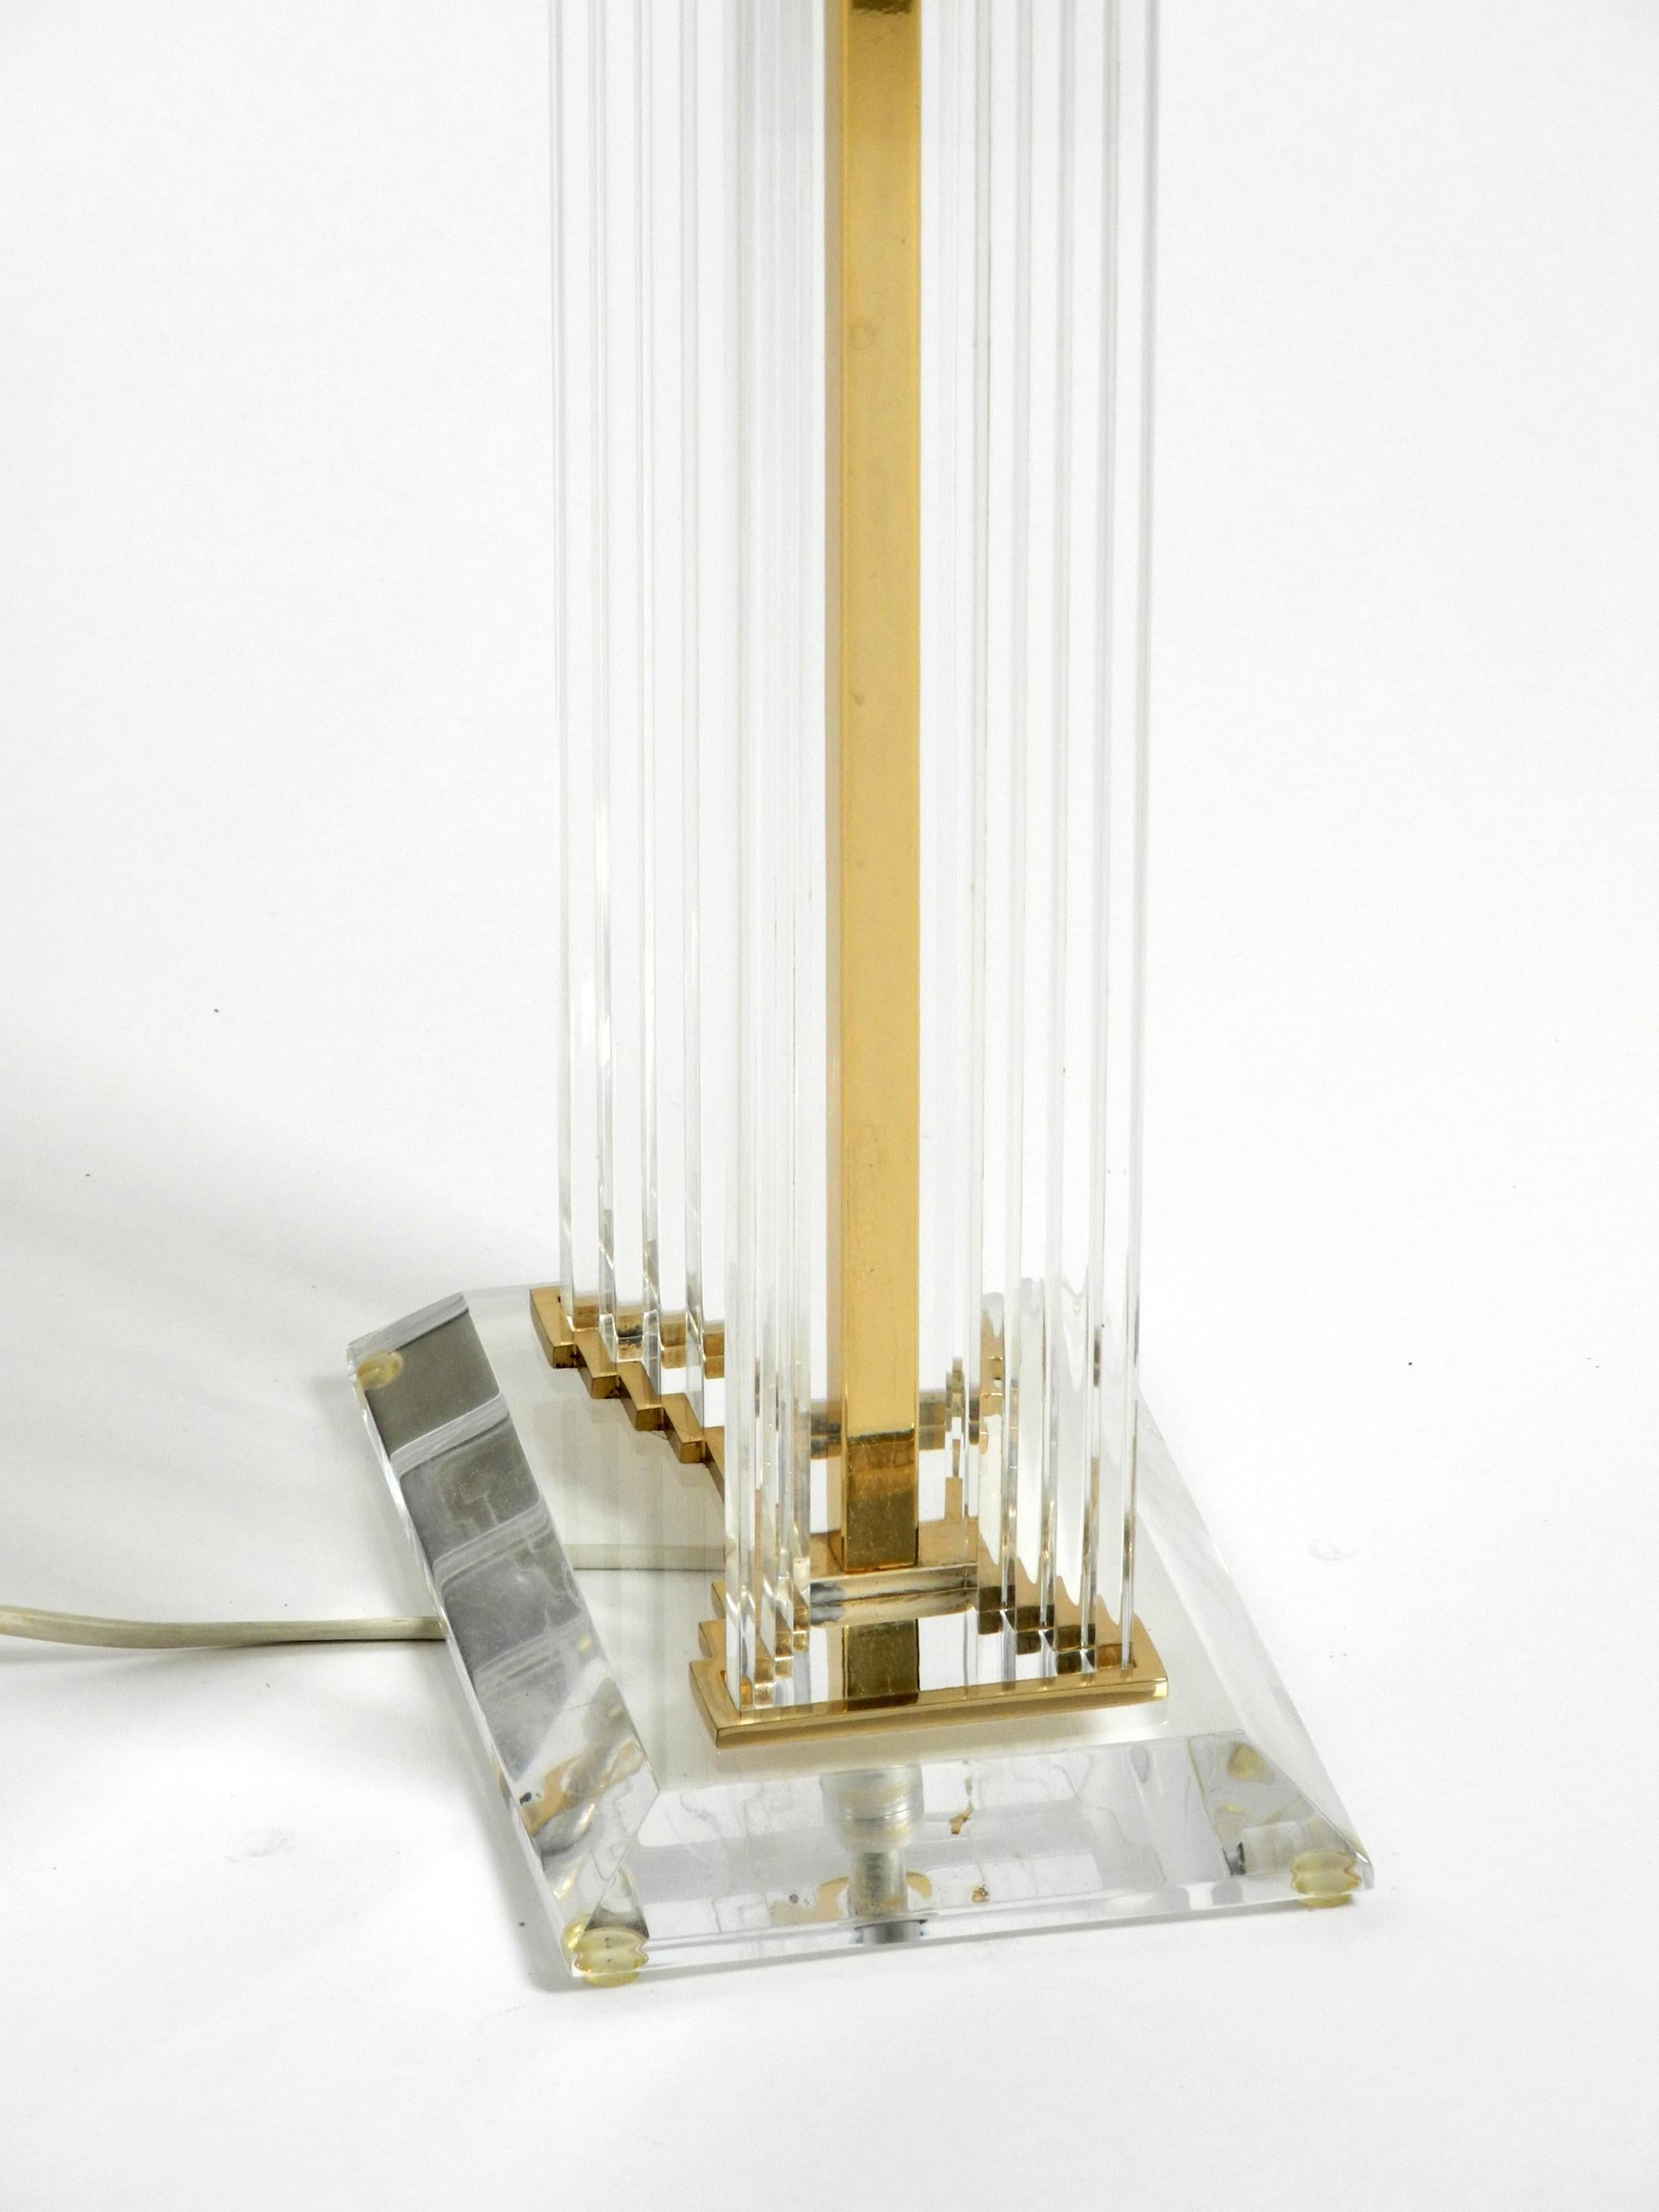 Very Rare Elegant Large Plexiglass Table Lamp from the 1970s with Silk Shade For Sale 9